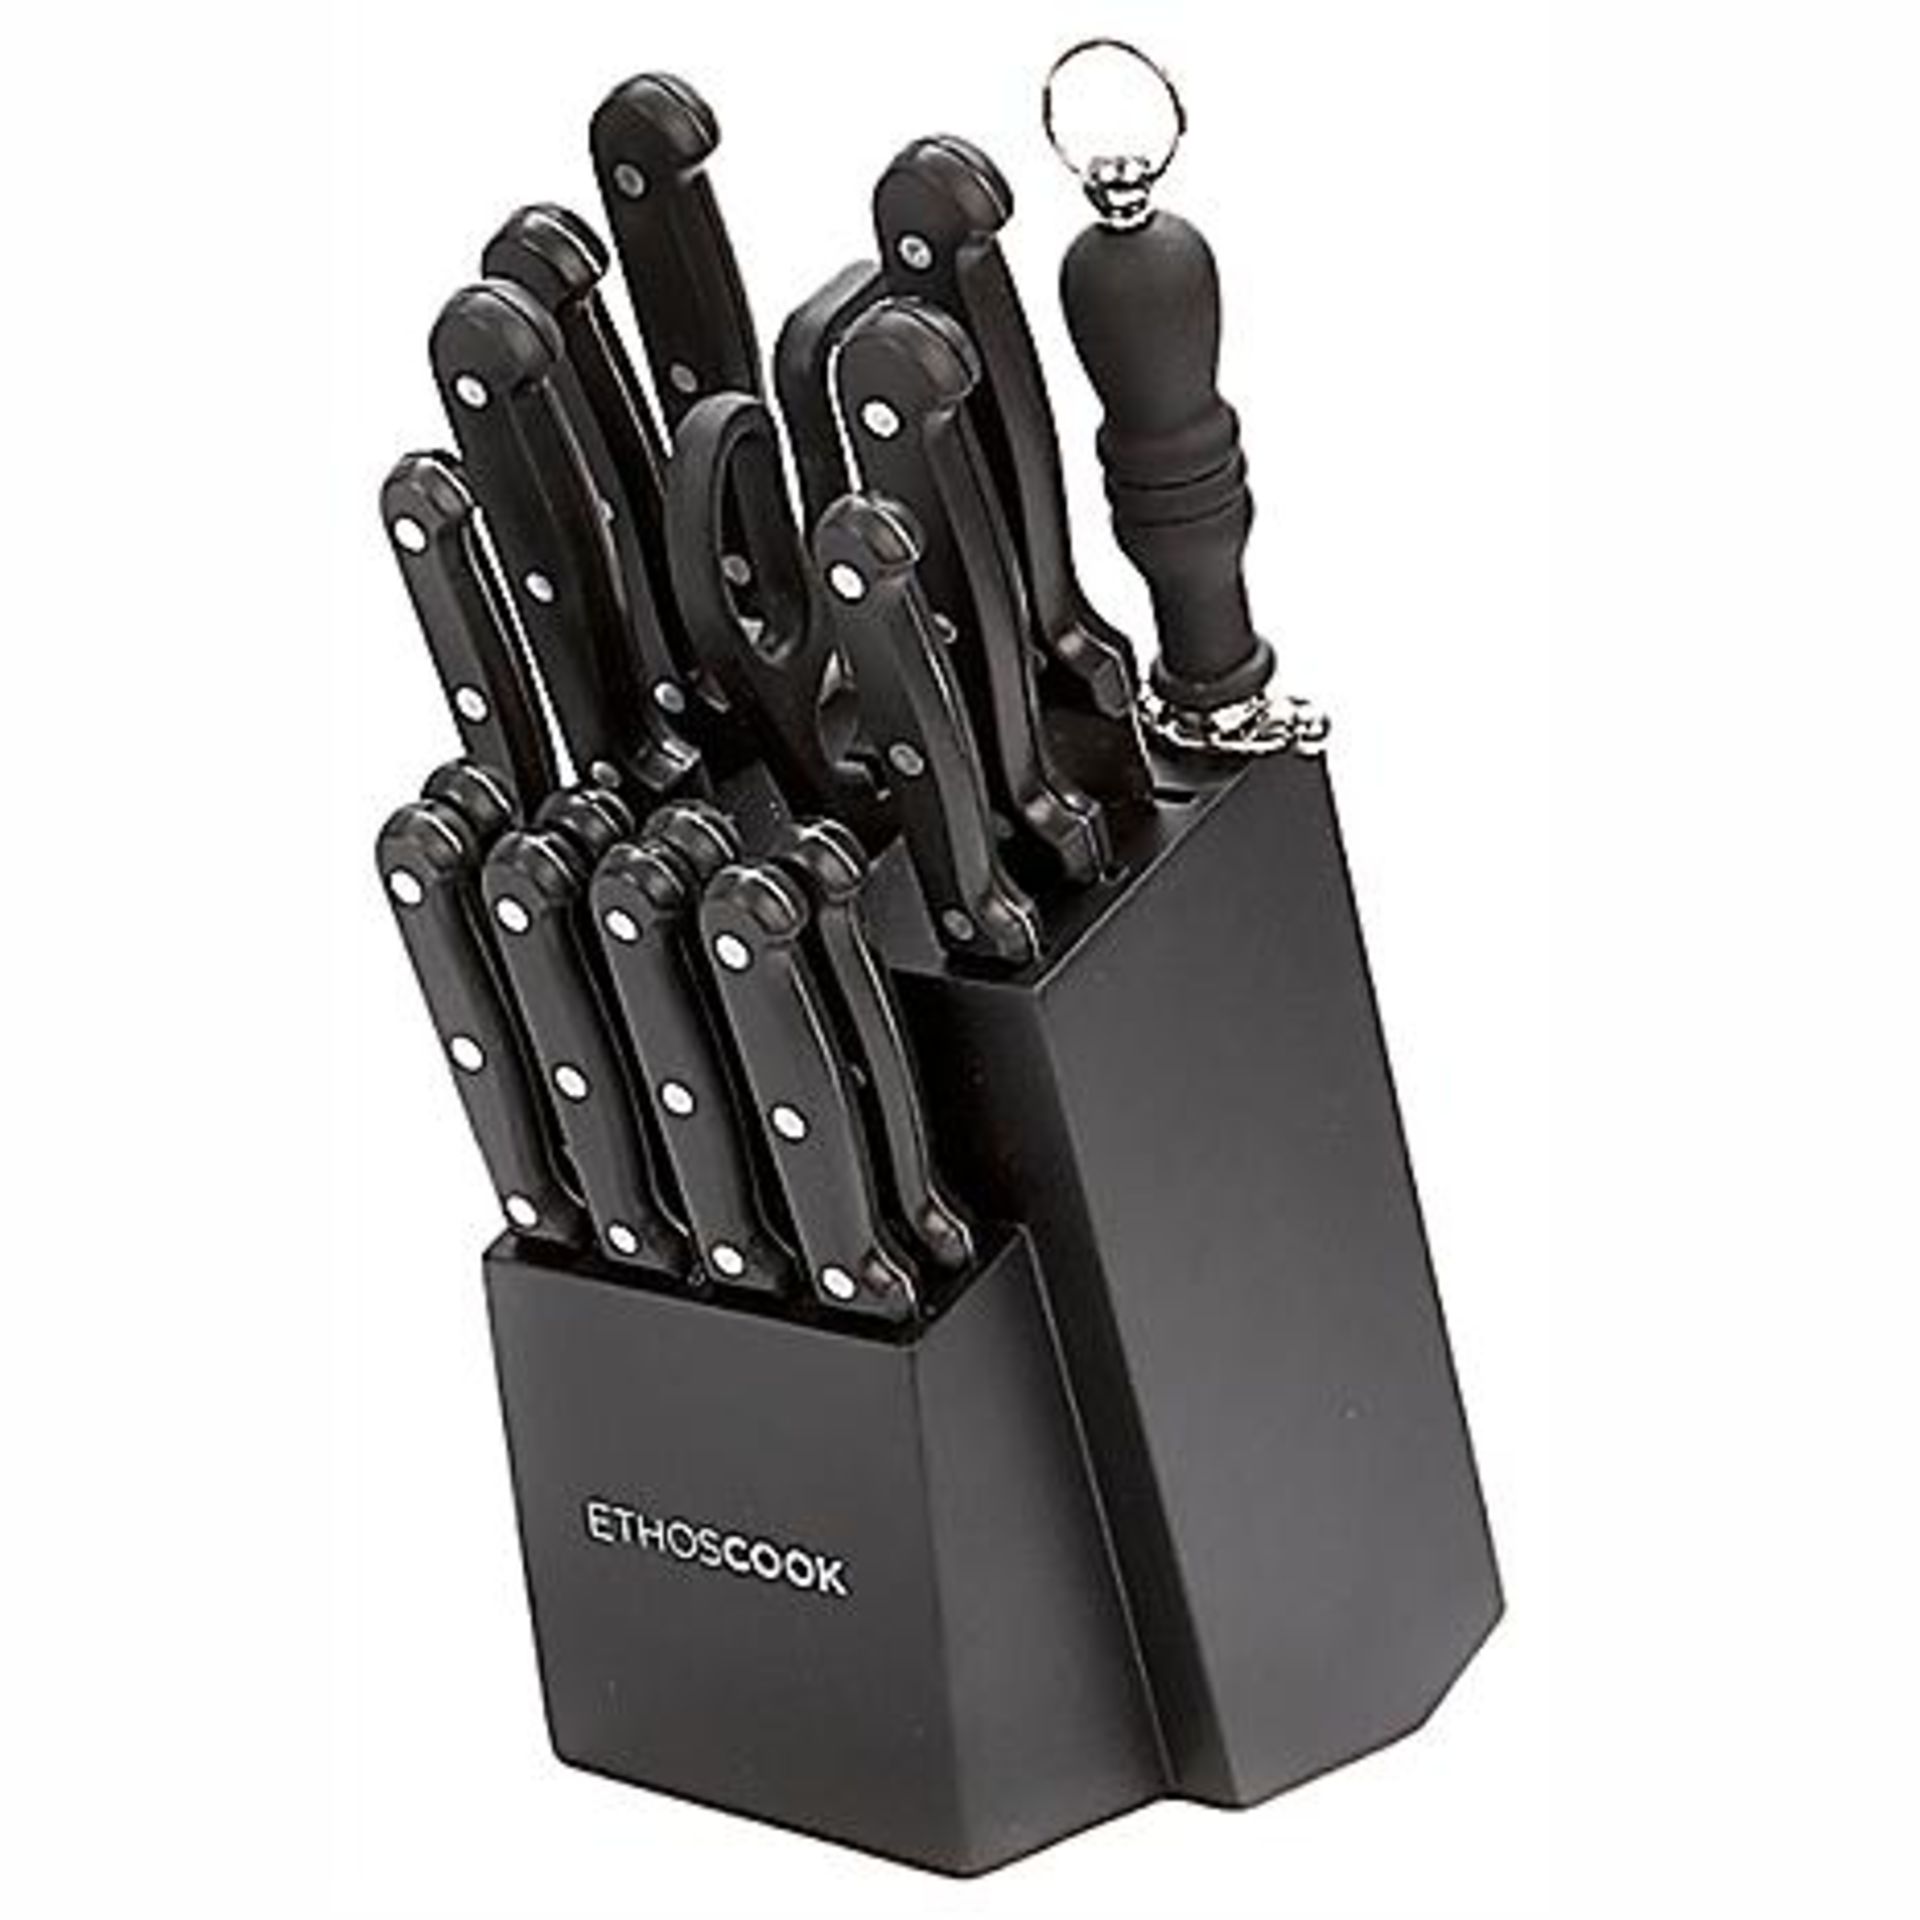 V *TRADE QTY* Brand New 18 Piece Knife Set In Block ISP Price £45.00 (Freemans) X 10 YOUR BID